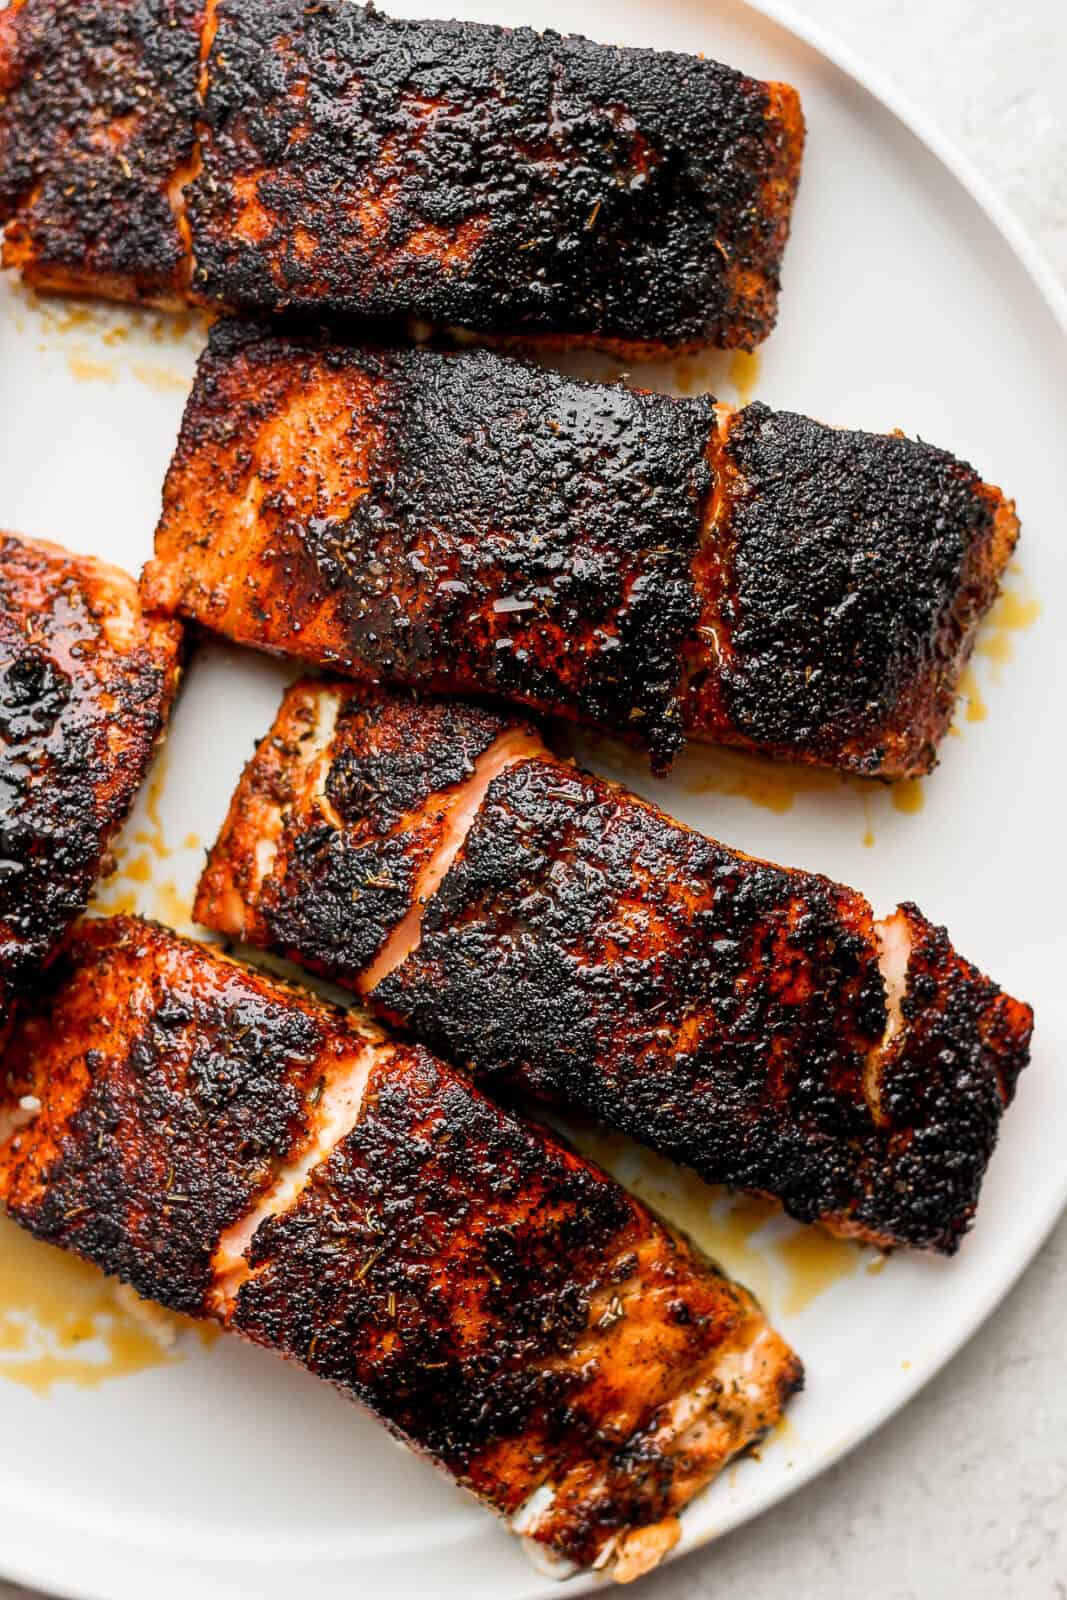 Blackened salmon fillets on a plate.